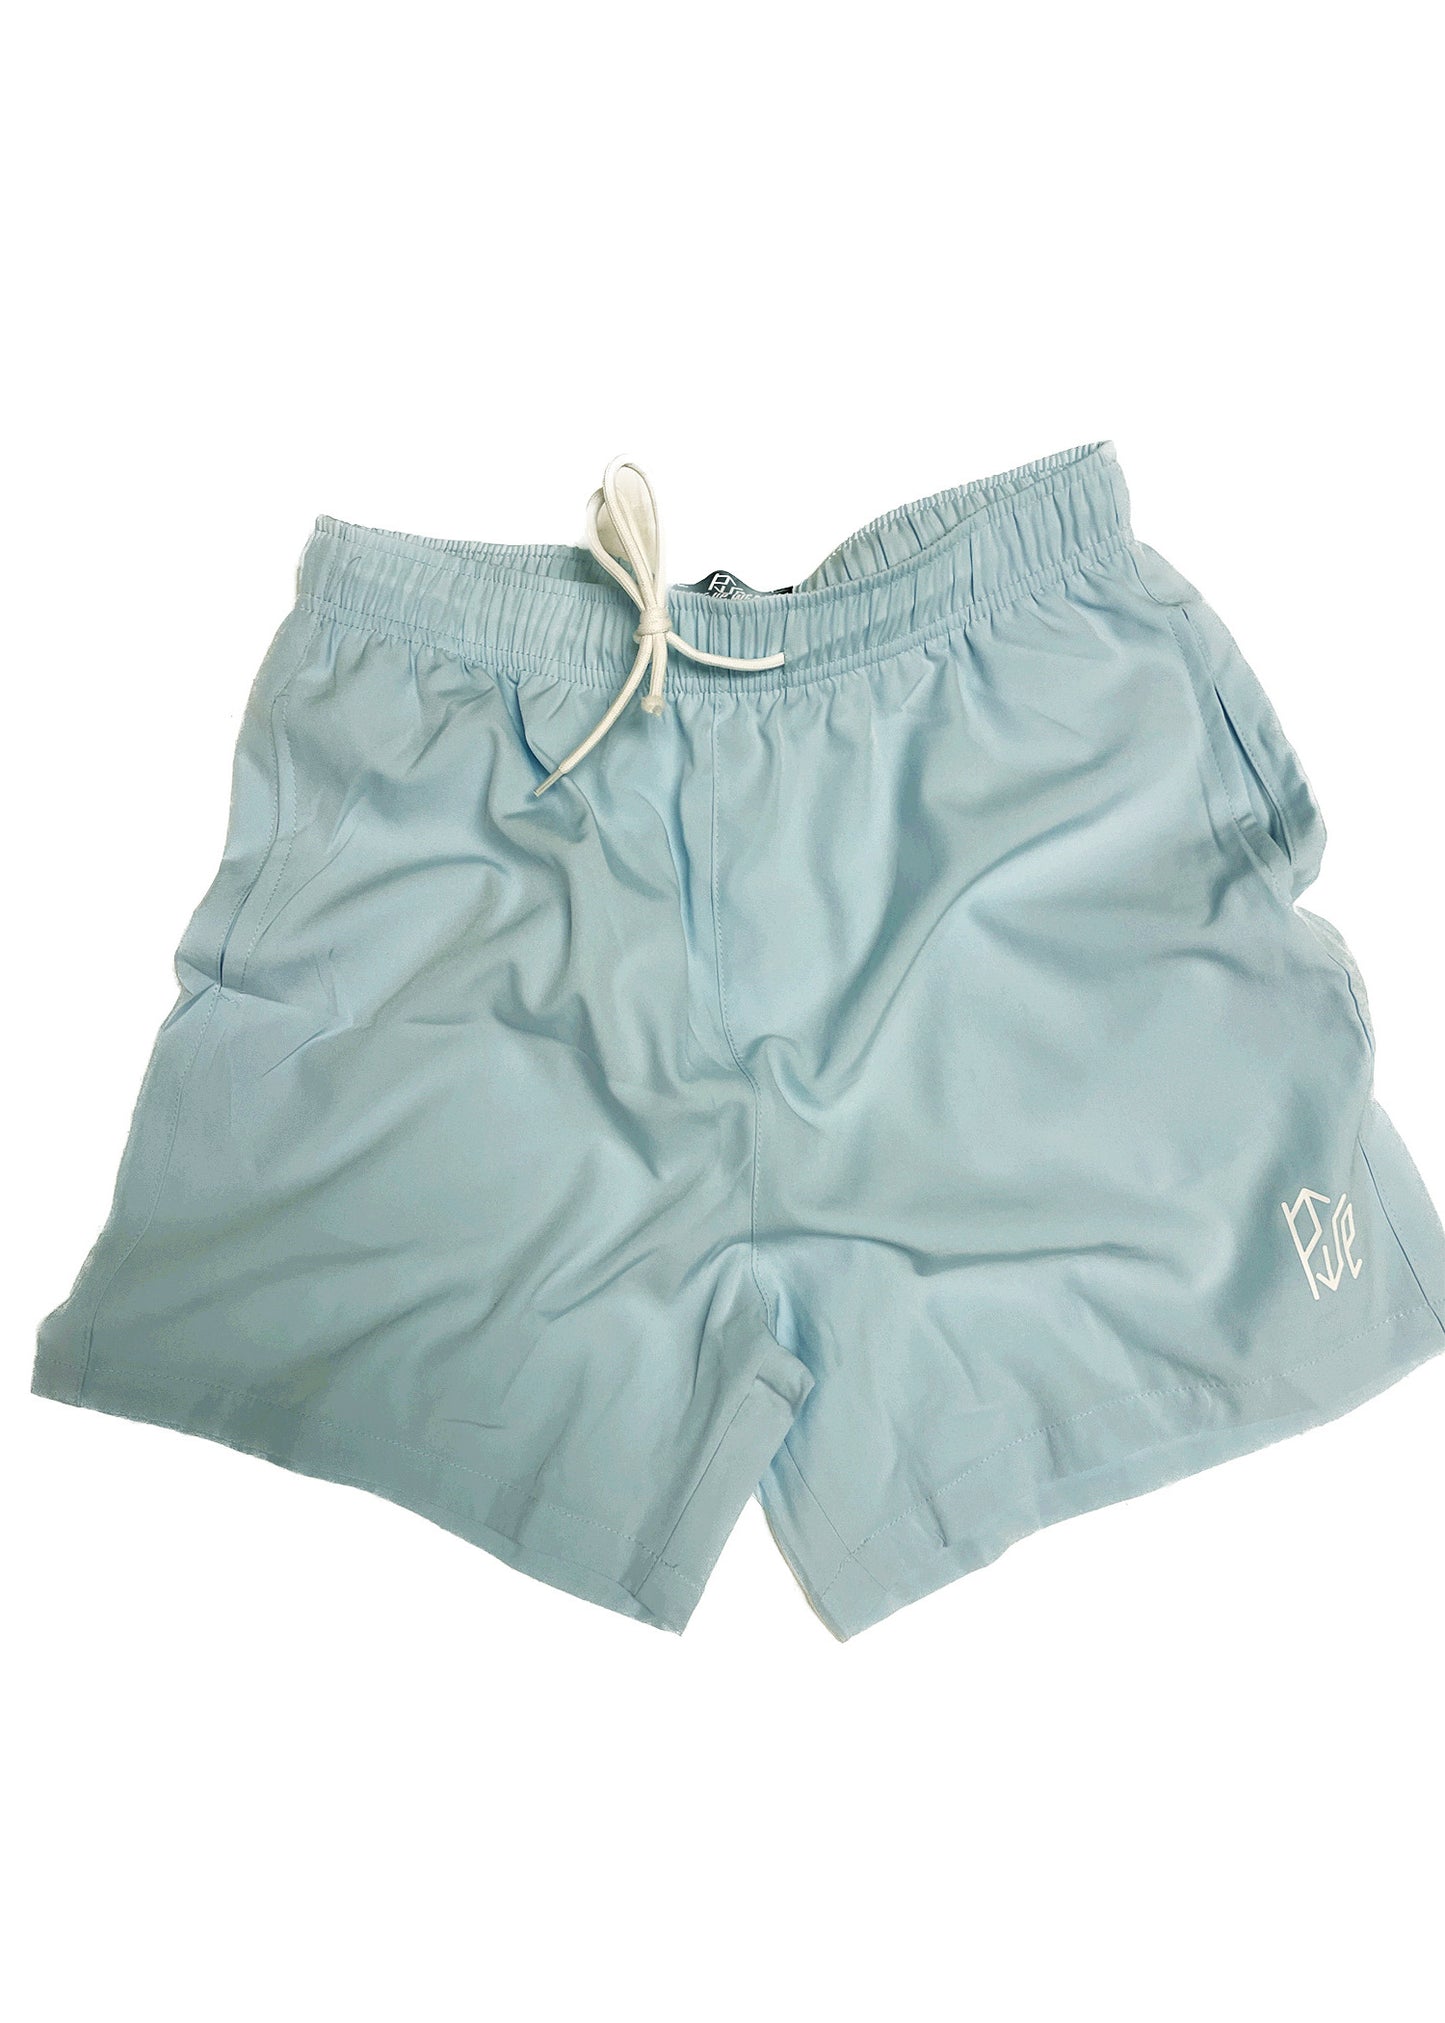 Ladies Essential Shorts - Rise Up Wear